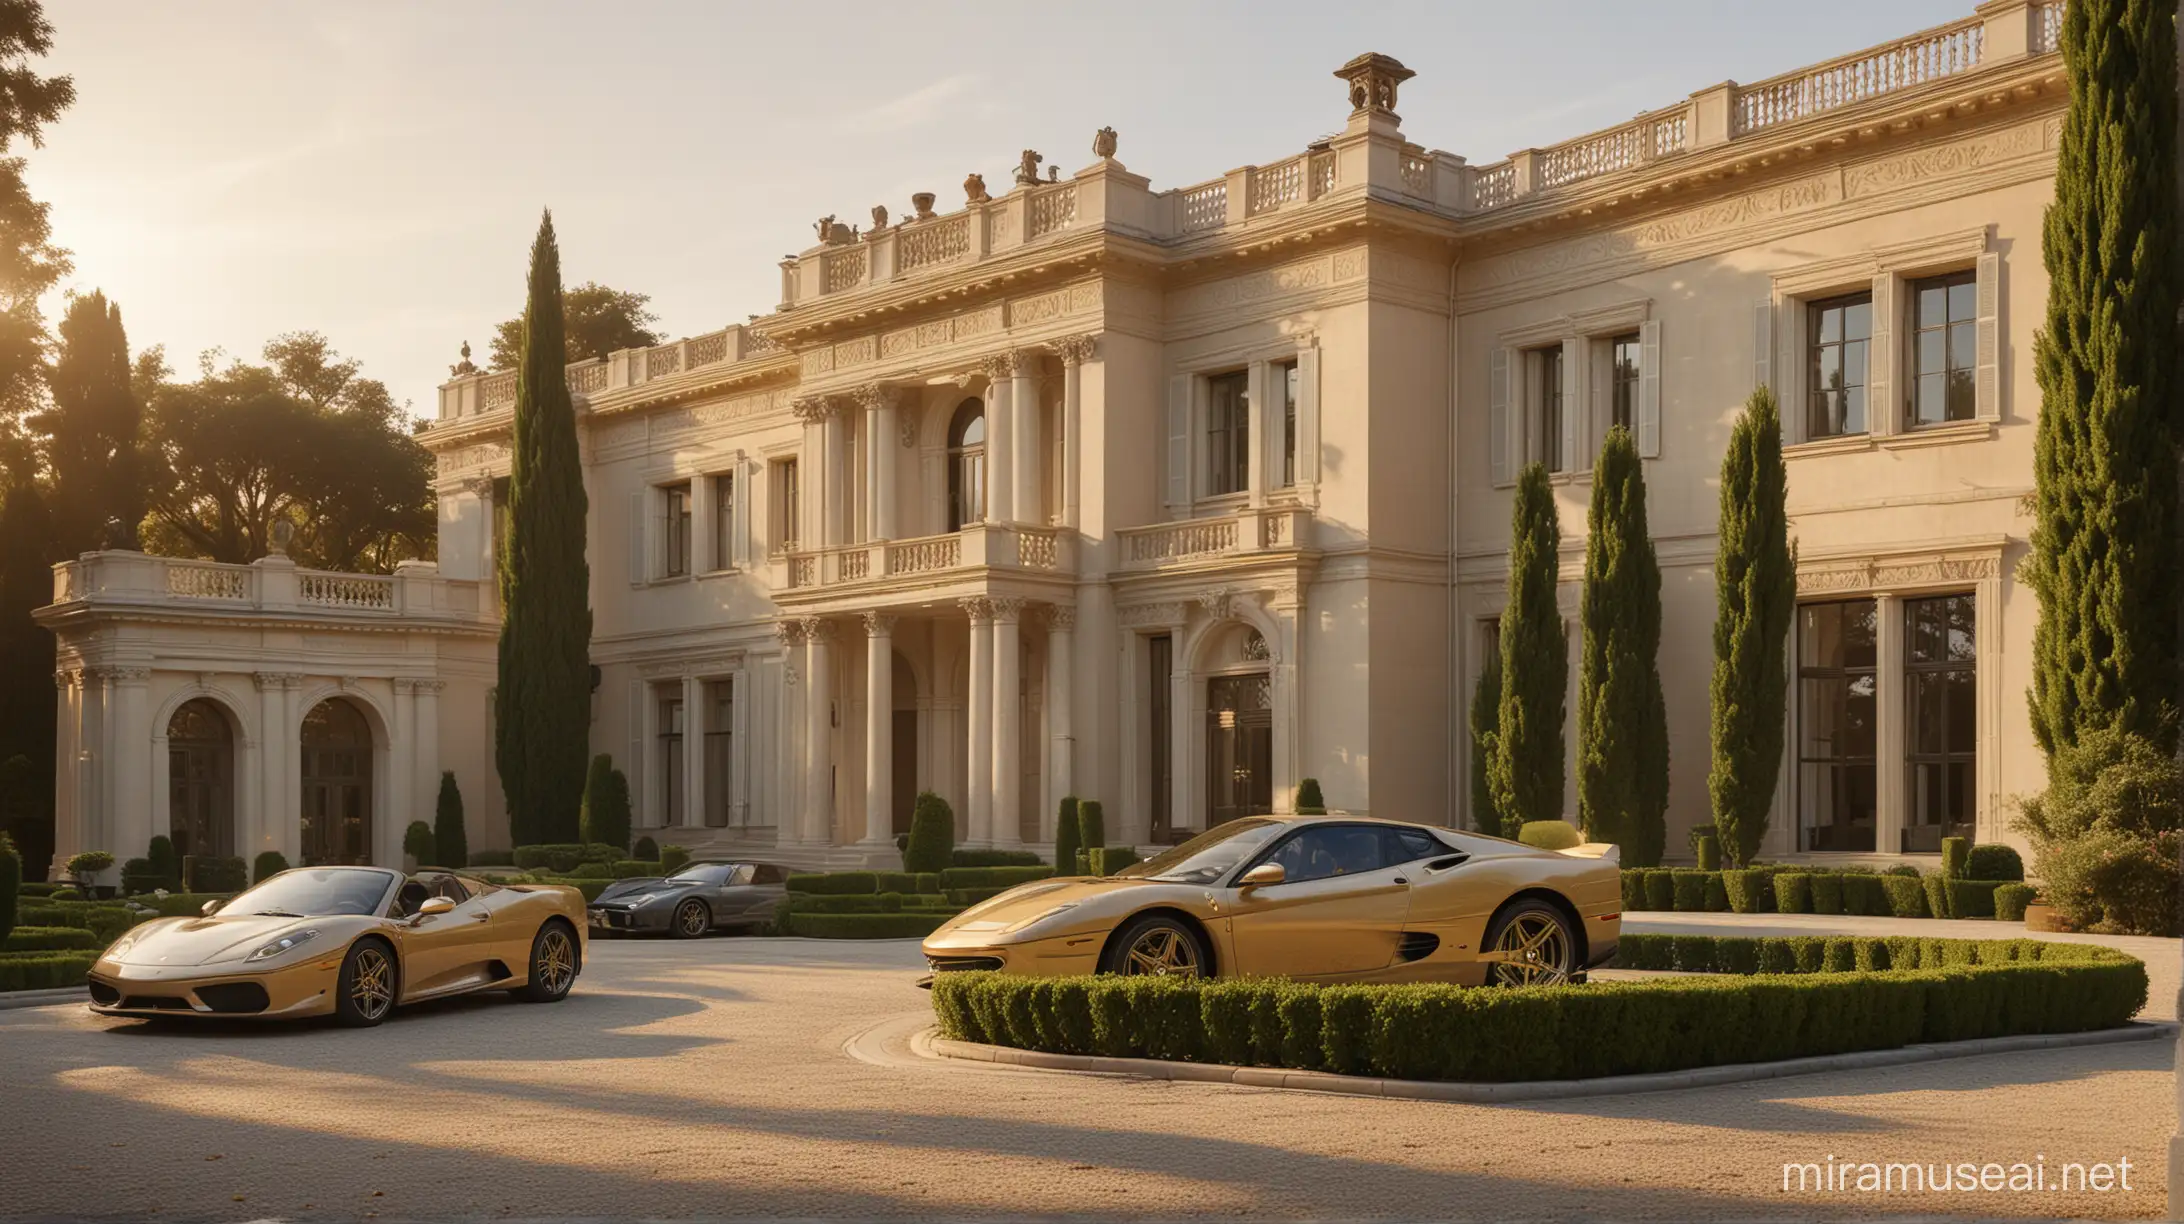 The image shows an opulent beige classical mansion with multiple stories, large windows, and decorative elements like balustrades and a central pediment above the front door. The mansion is surrounded by manicured gardens with topiary shrubs and tall cypress trees. A golden luxury sports car, which appears to be a Ferrari, is parked on the driveway in front of the house. The lighting suggests it's either sunrise or sunset, casting a warm glow on the scene.

Here is a prompt you could use to create an image like this:

"Create a highly detailed, photorealistic image of a luxurious three-story modern mansion in a neoclassical architectural style with beige stucco walls, elaborate window frames, and a grand entrance with columns and a decorative pediment. The mansion is set amidst a manicured formal garden with symmetrical topiary shrubs and tall, slender cypress trees. A golden latest model Ferrari sports car is parked on the cobblestone driveway in front of the mansion. The scene is bathed in the warm, golden light of the early morning sun, highlighting the opulence of the property."